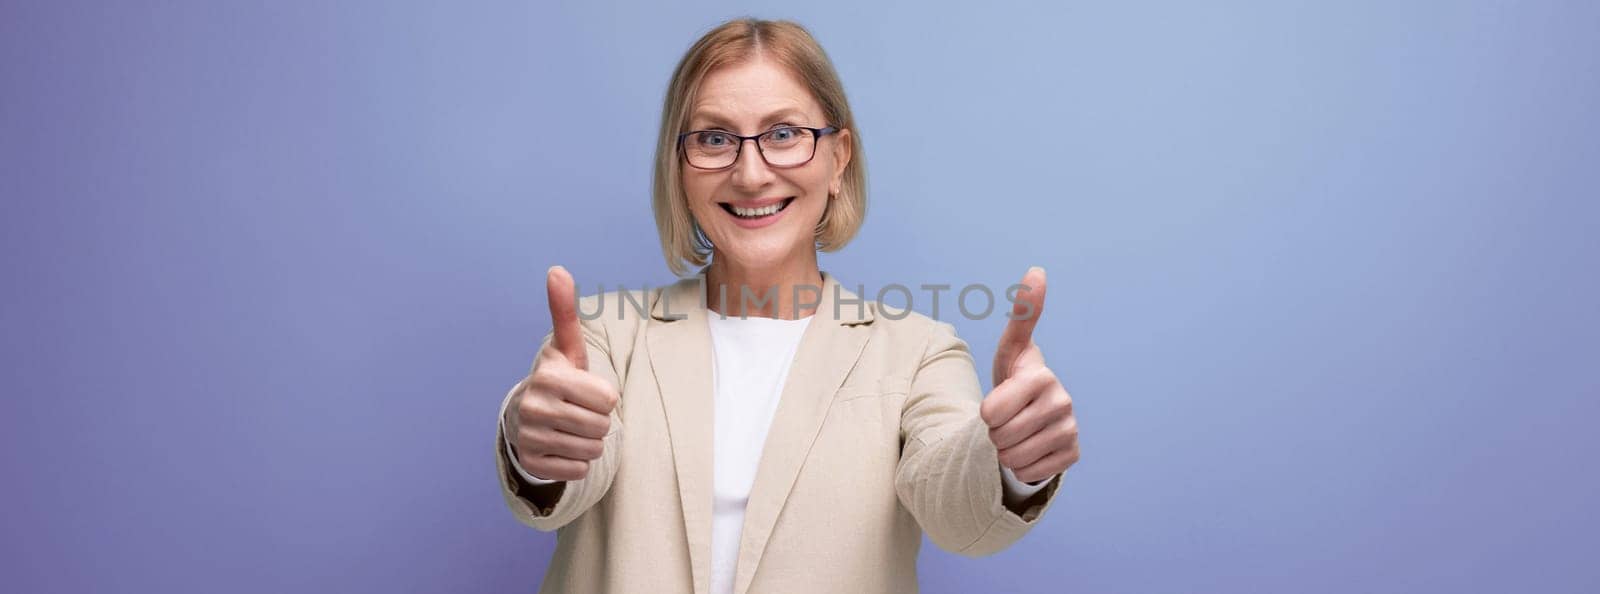 50s business woman in a stylish jacket on a bright studio background with copy space by TRMK